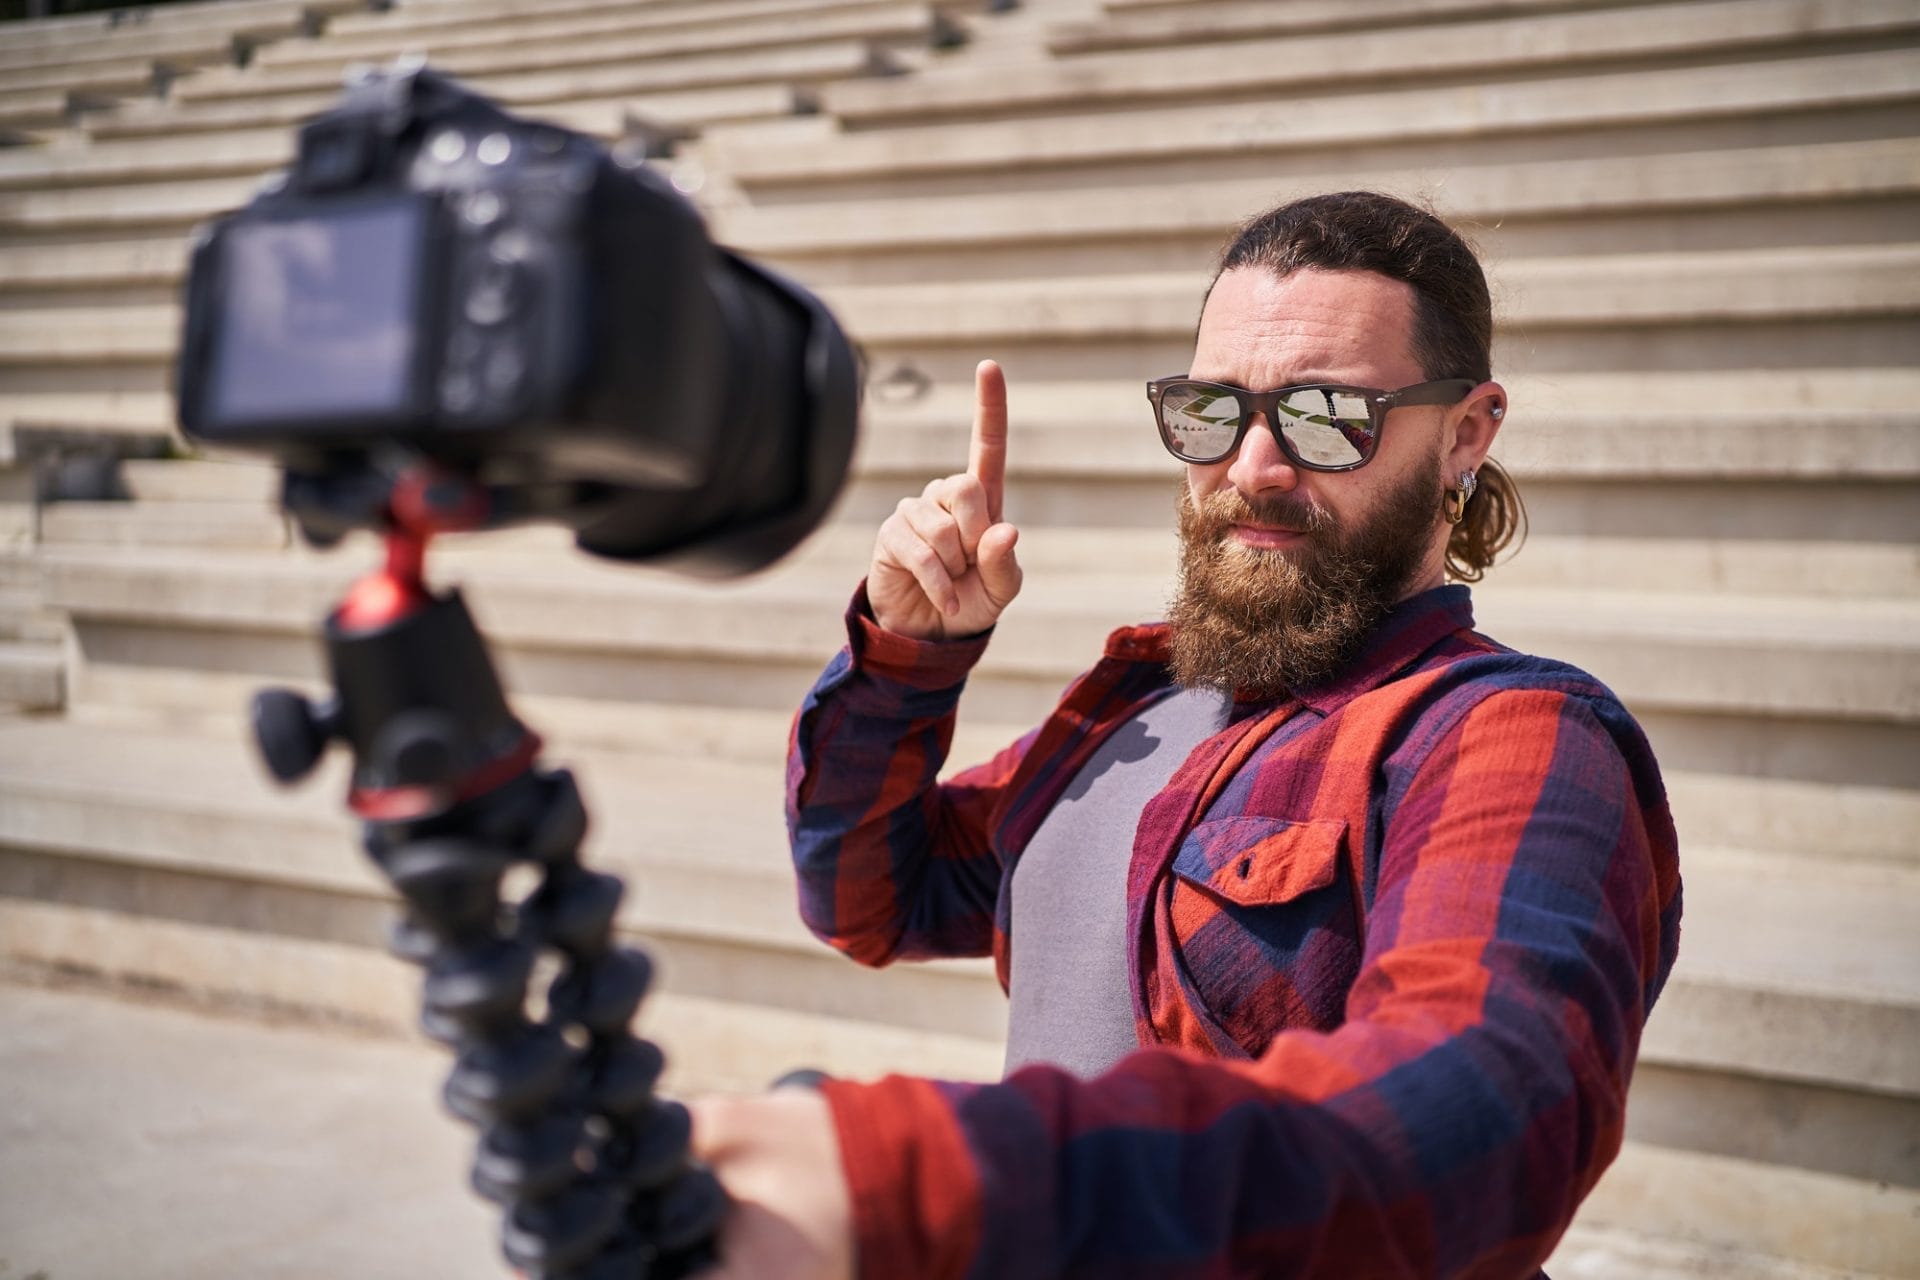 man with sunglasses recording with a camera while creating content for social media